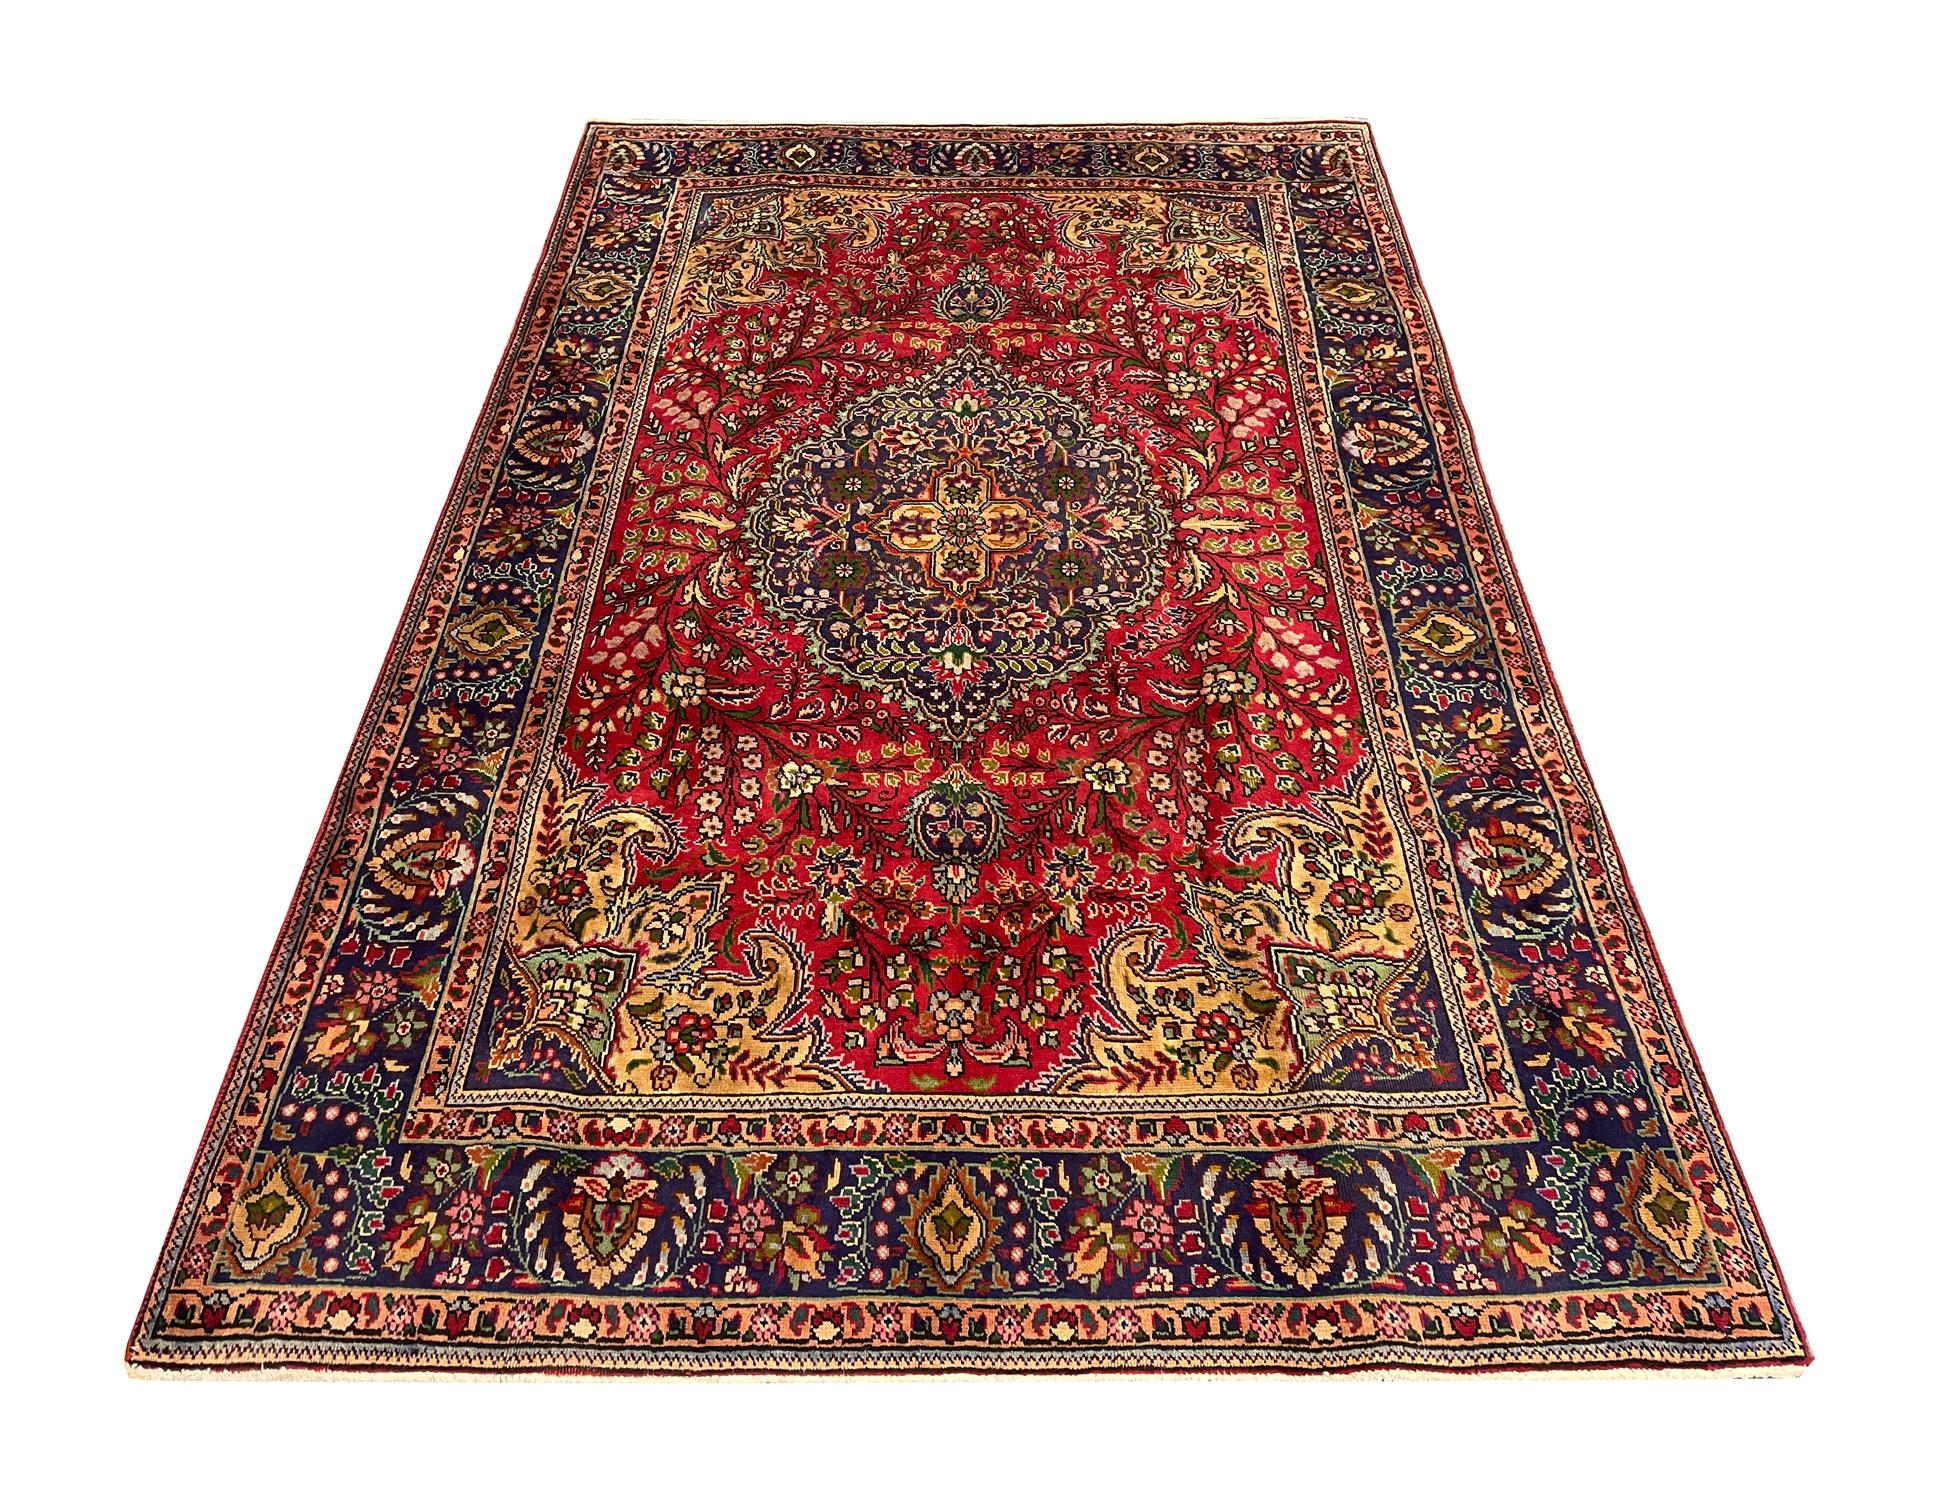 features a large medallion and highly-decorative surrounding design. Woven with a bold red background with blue, brown and beige accents that make up the intricate medallion and symmetrical surrounding design. The design and palette of this wool rug